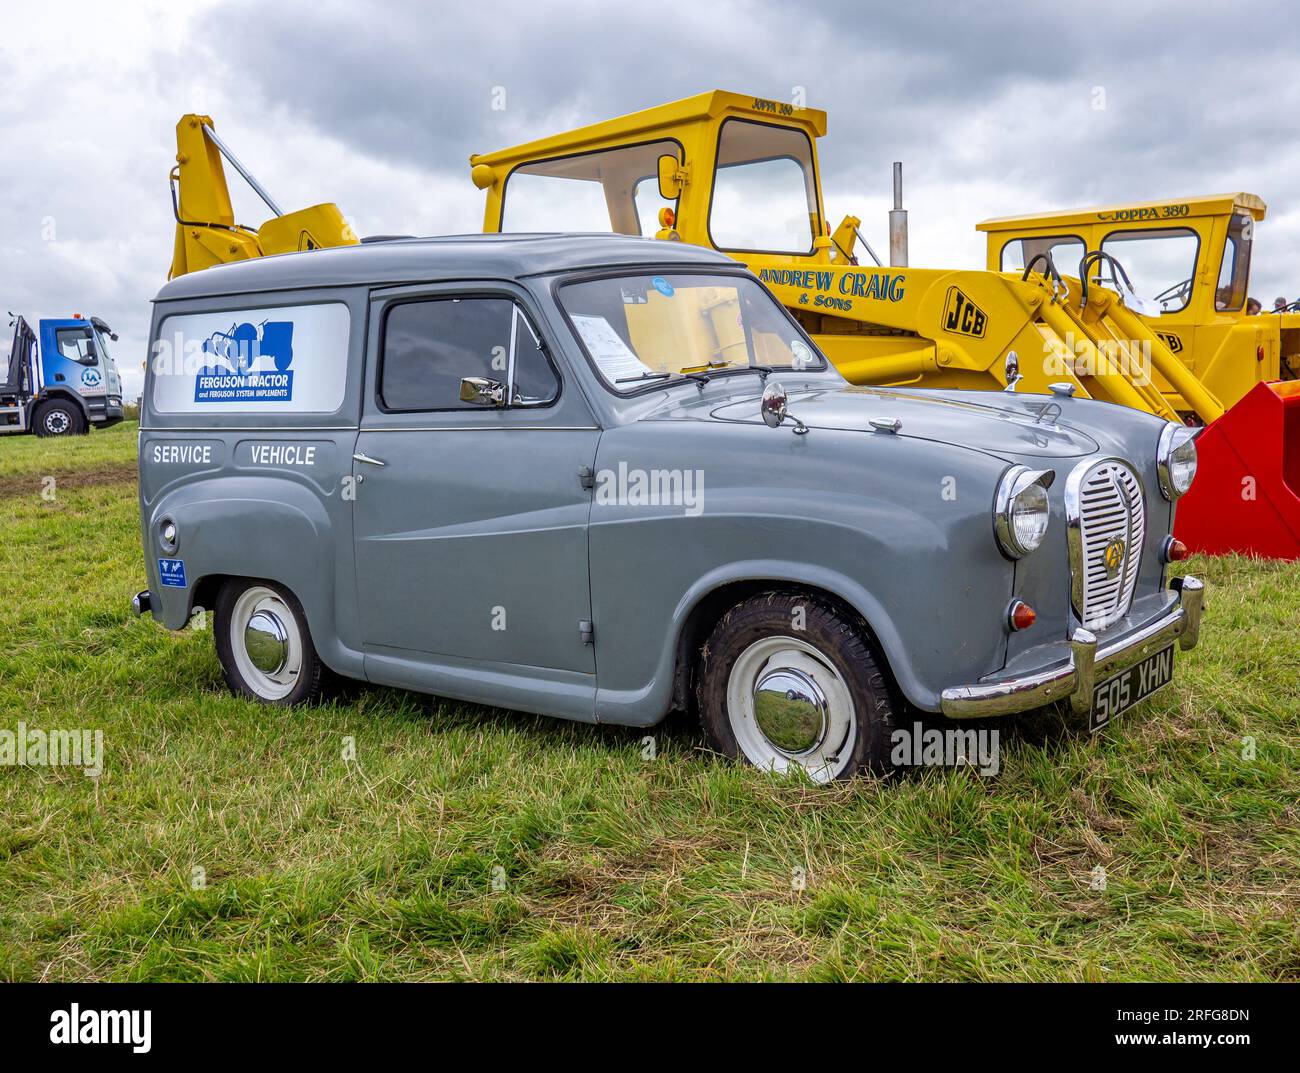 Austin A35 service van at a tractor show Stock Photo